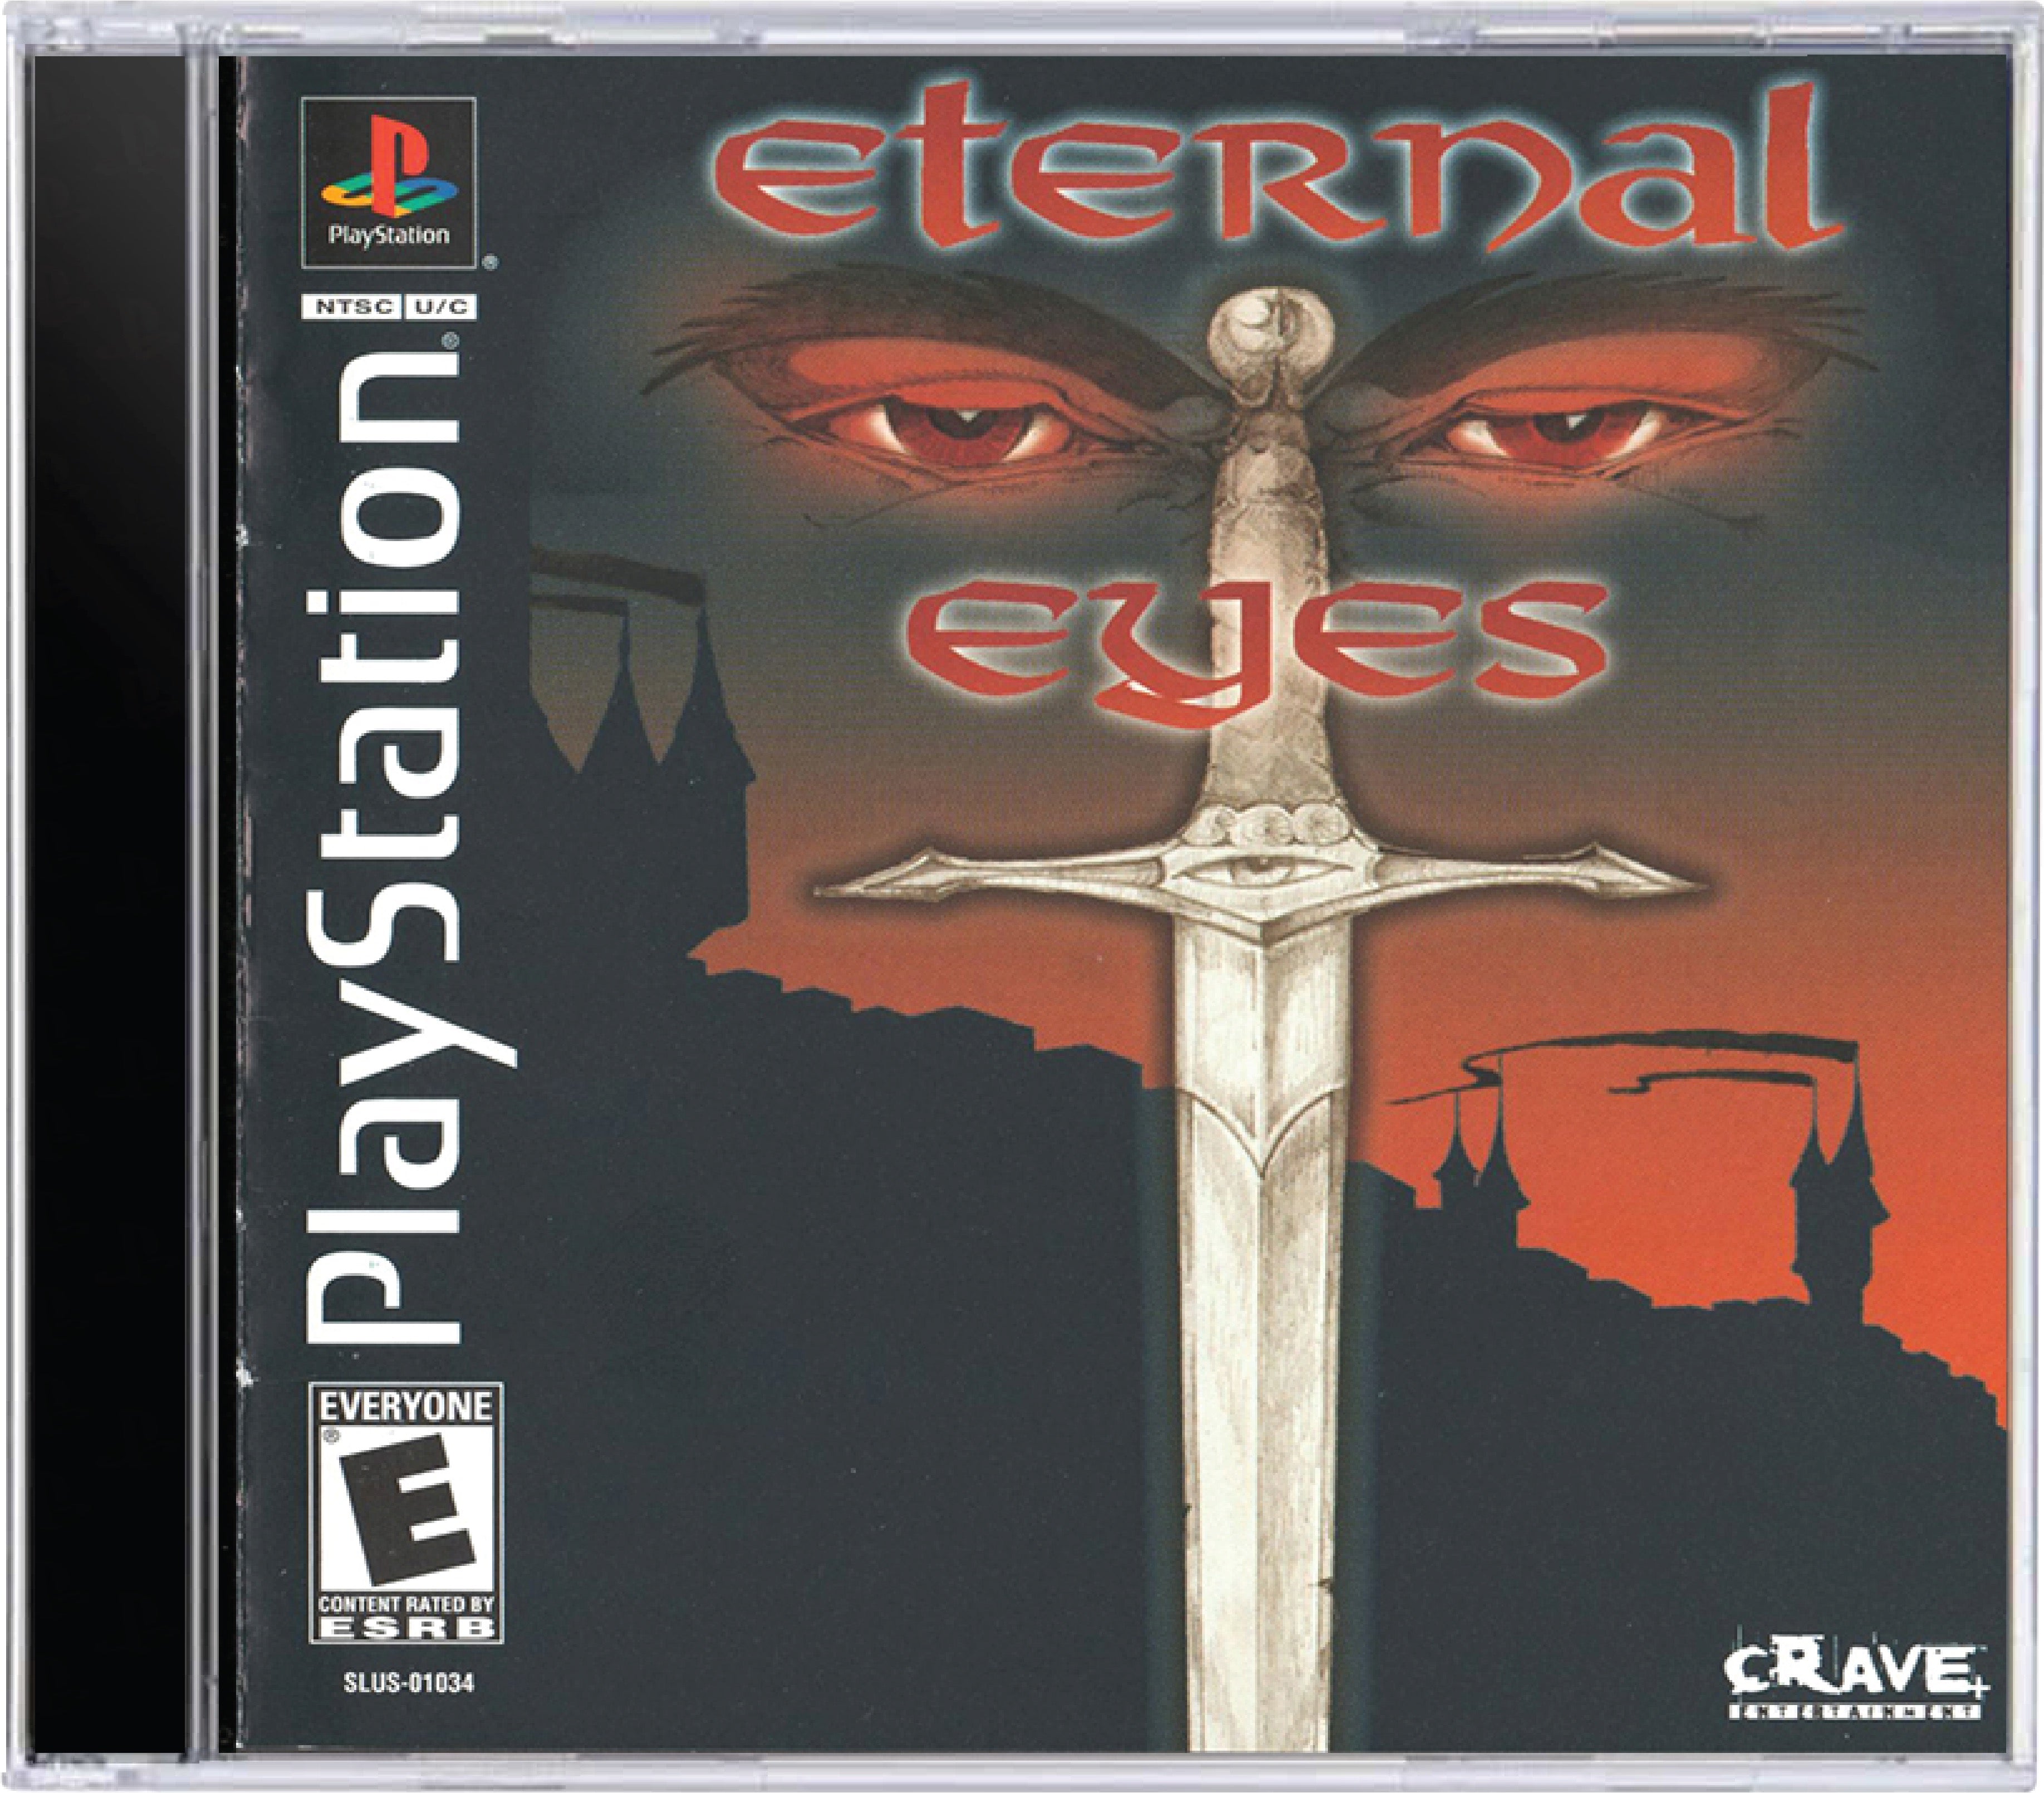 Eternal Eyes Cover Art and Product Photo